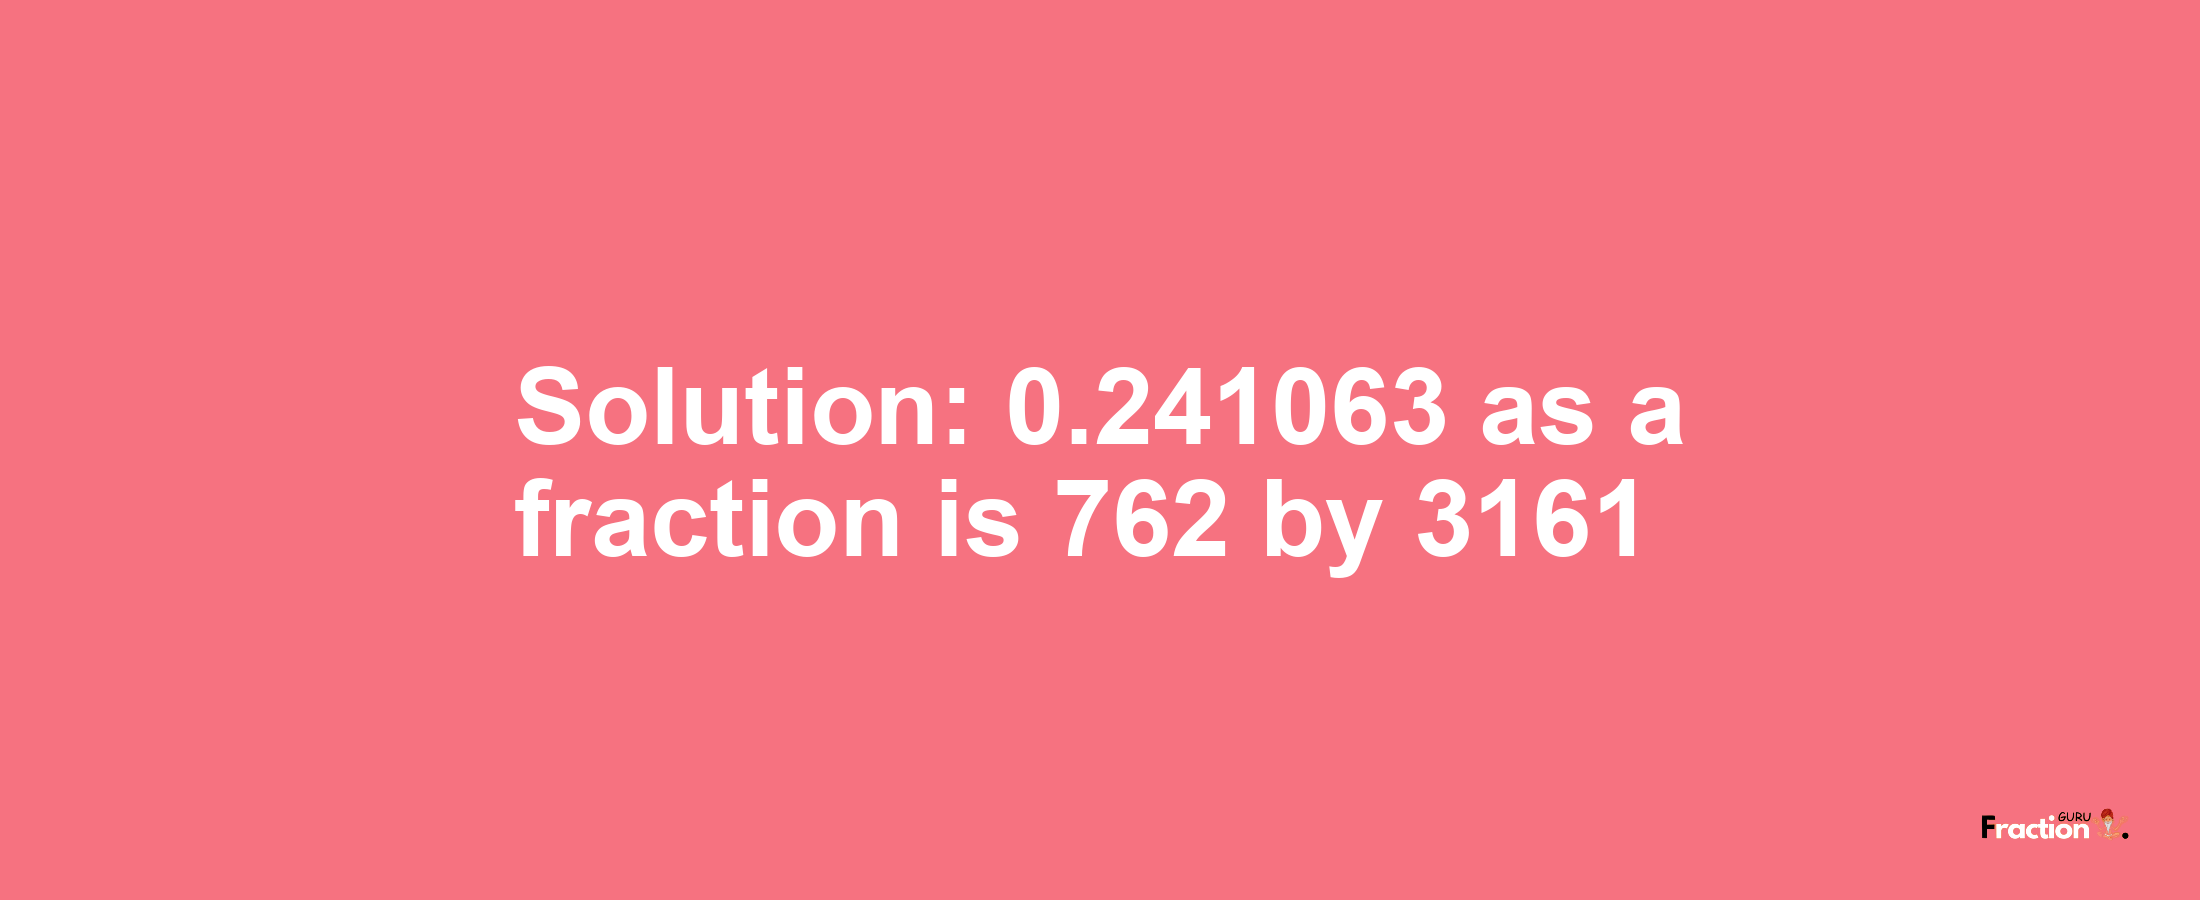 Solution:0.241063 as a fraction is 762/3161